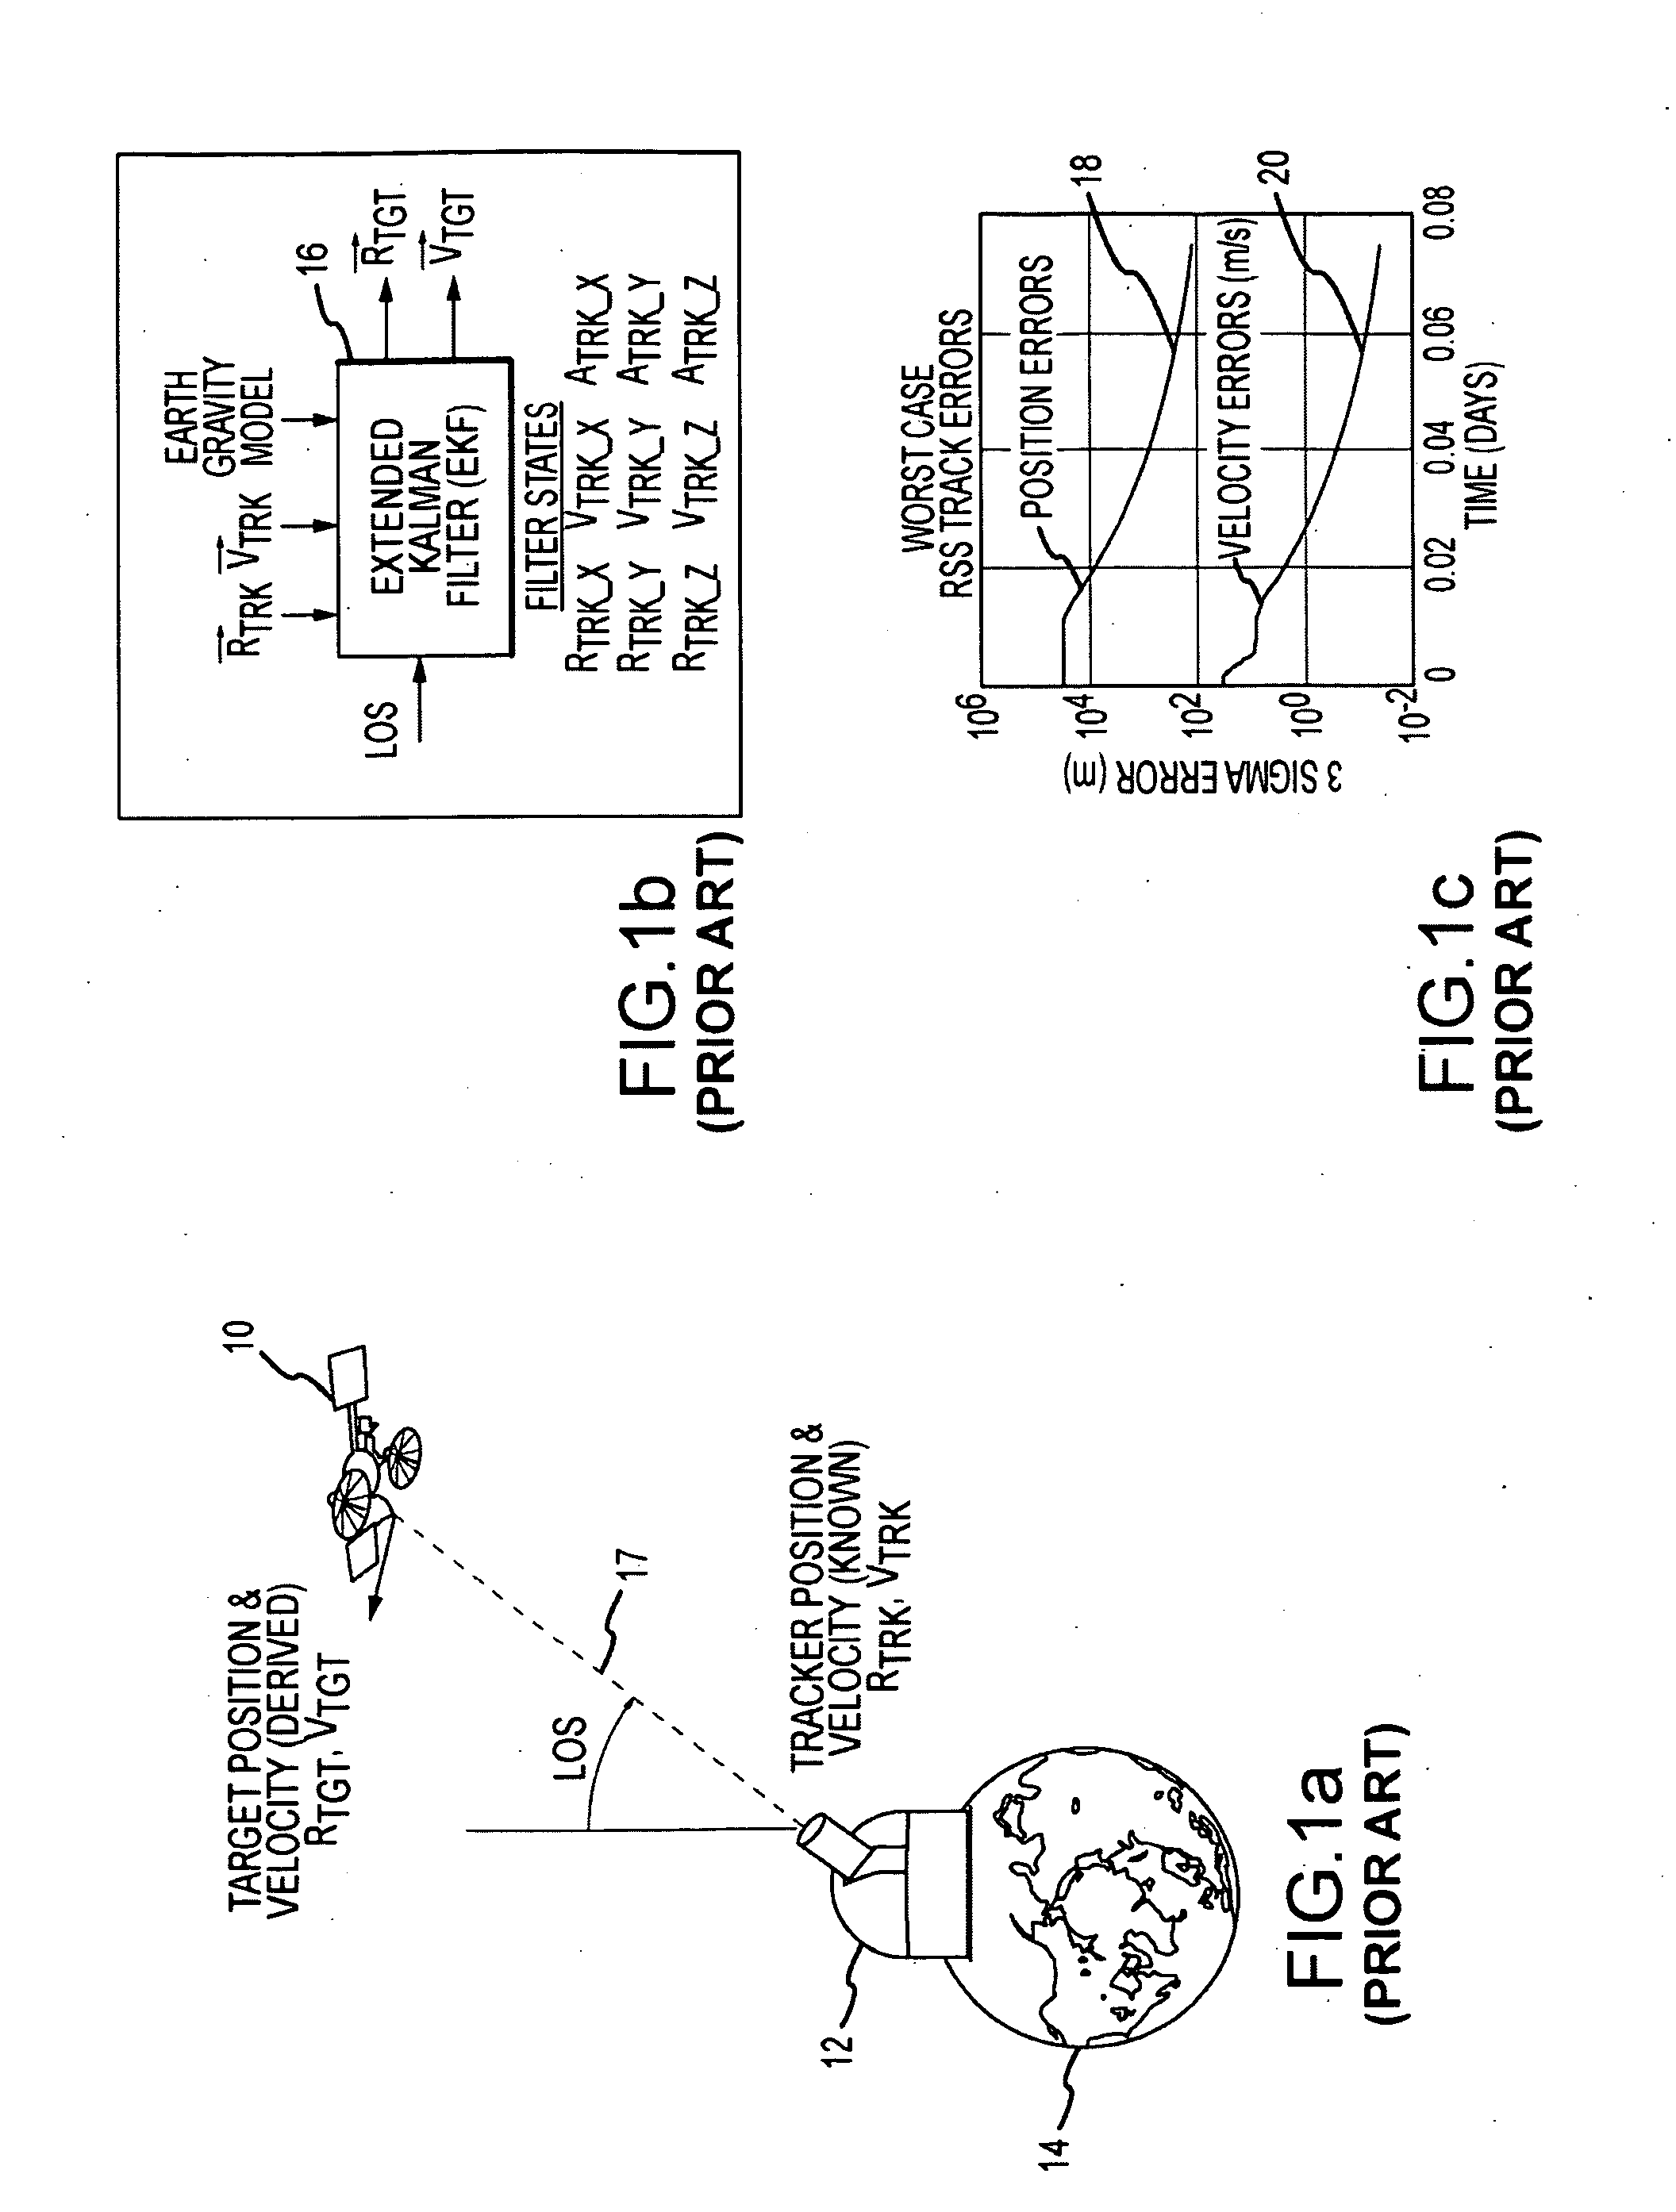 System and method of passive and autonomous navigation of space vehicles using an extended kalman filter